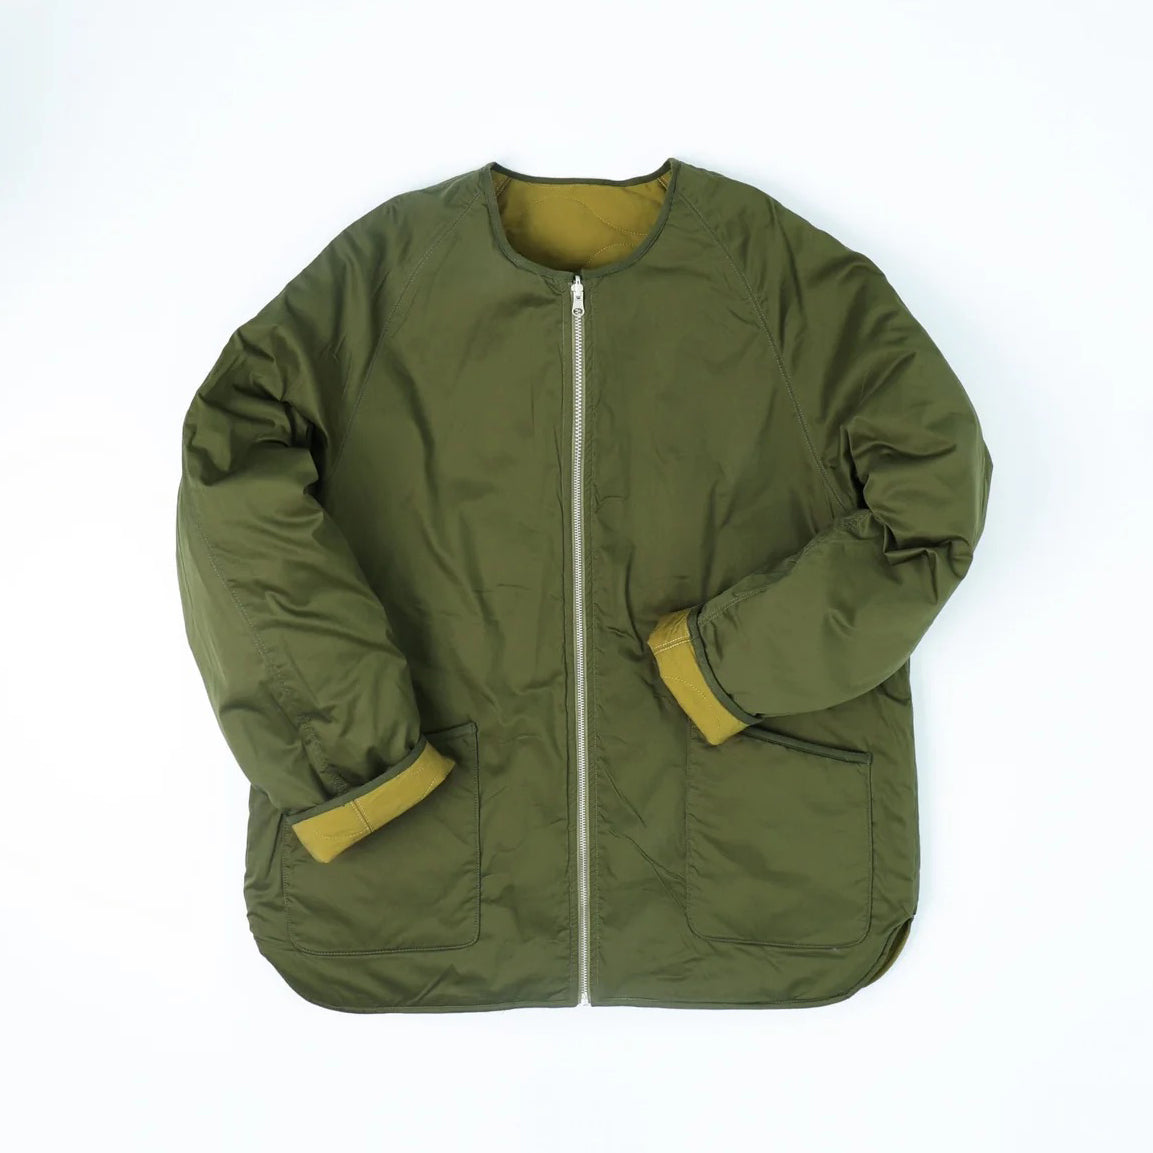 No:#604 | Name:FW23-REVERSIBLE BIG LINER JACKET | Color:Green| Size:M/L【WORKWARE】【入荷予定アイテム・入荷連絡可能】